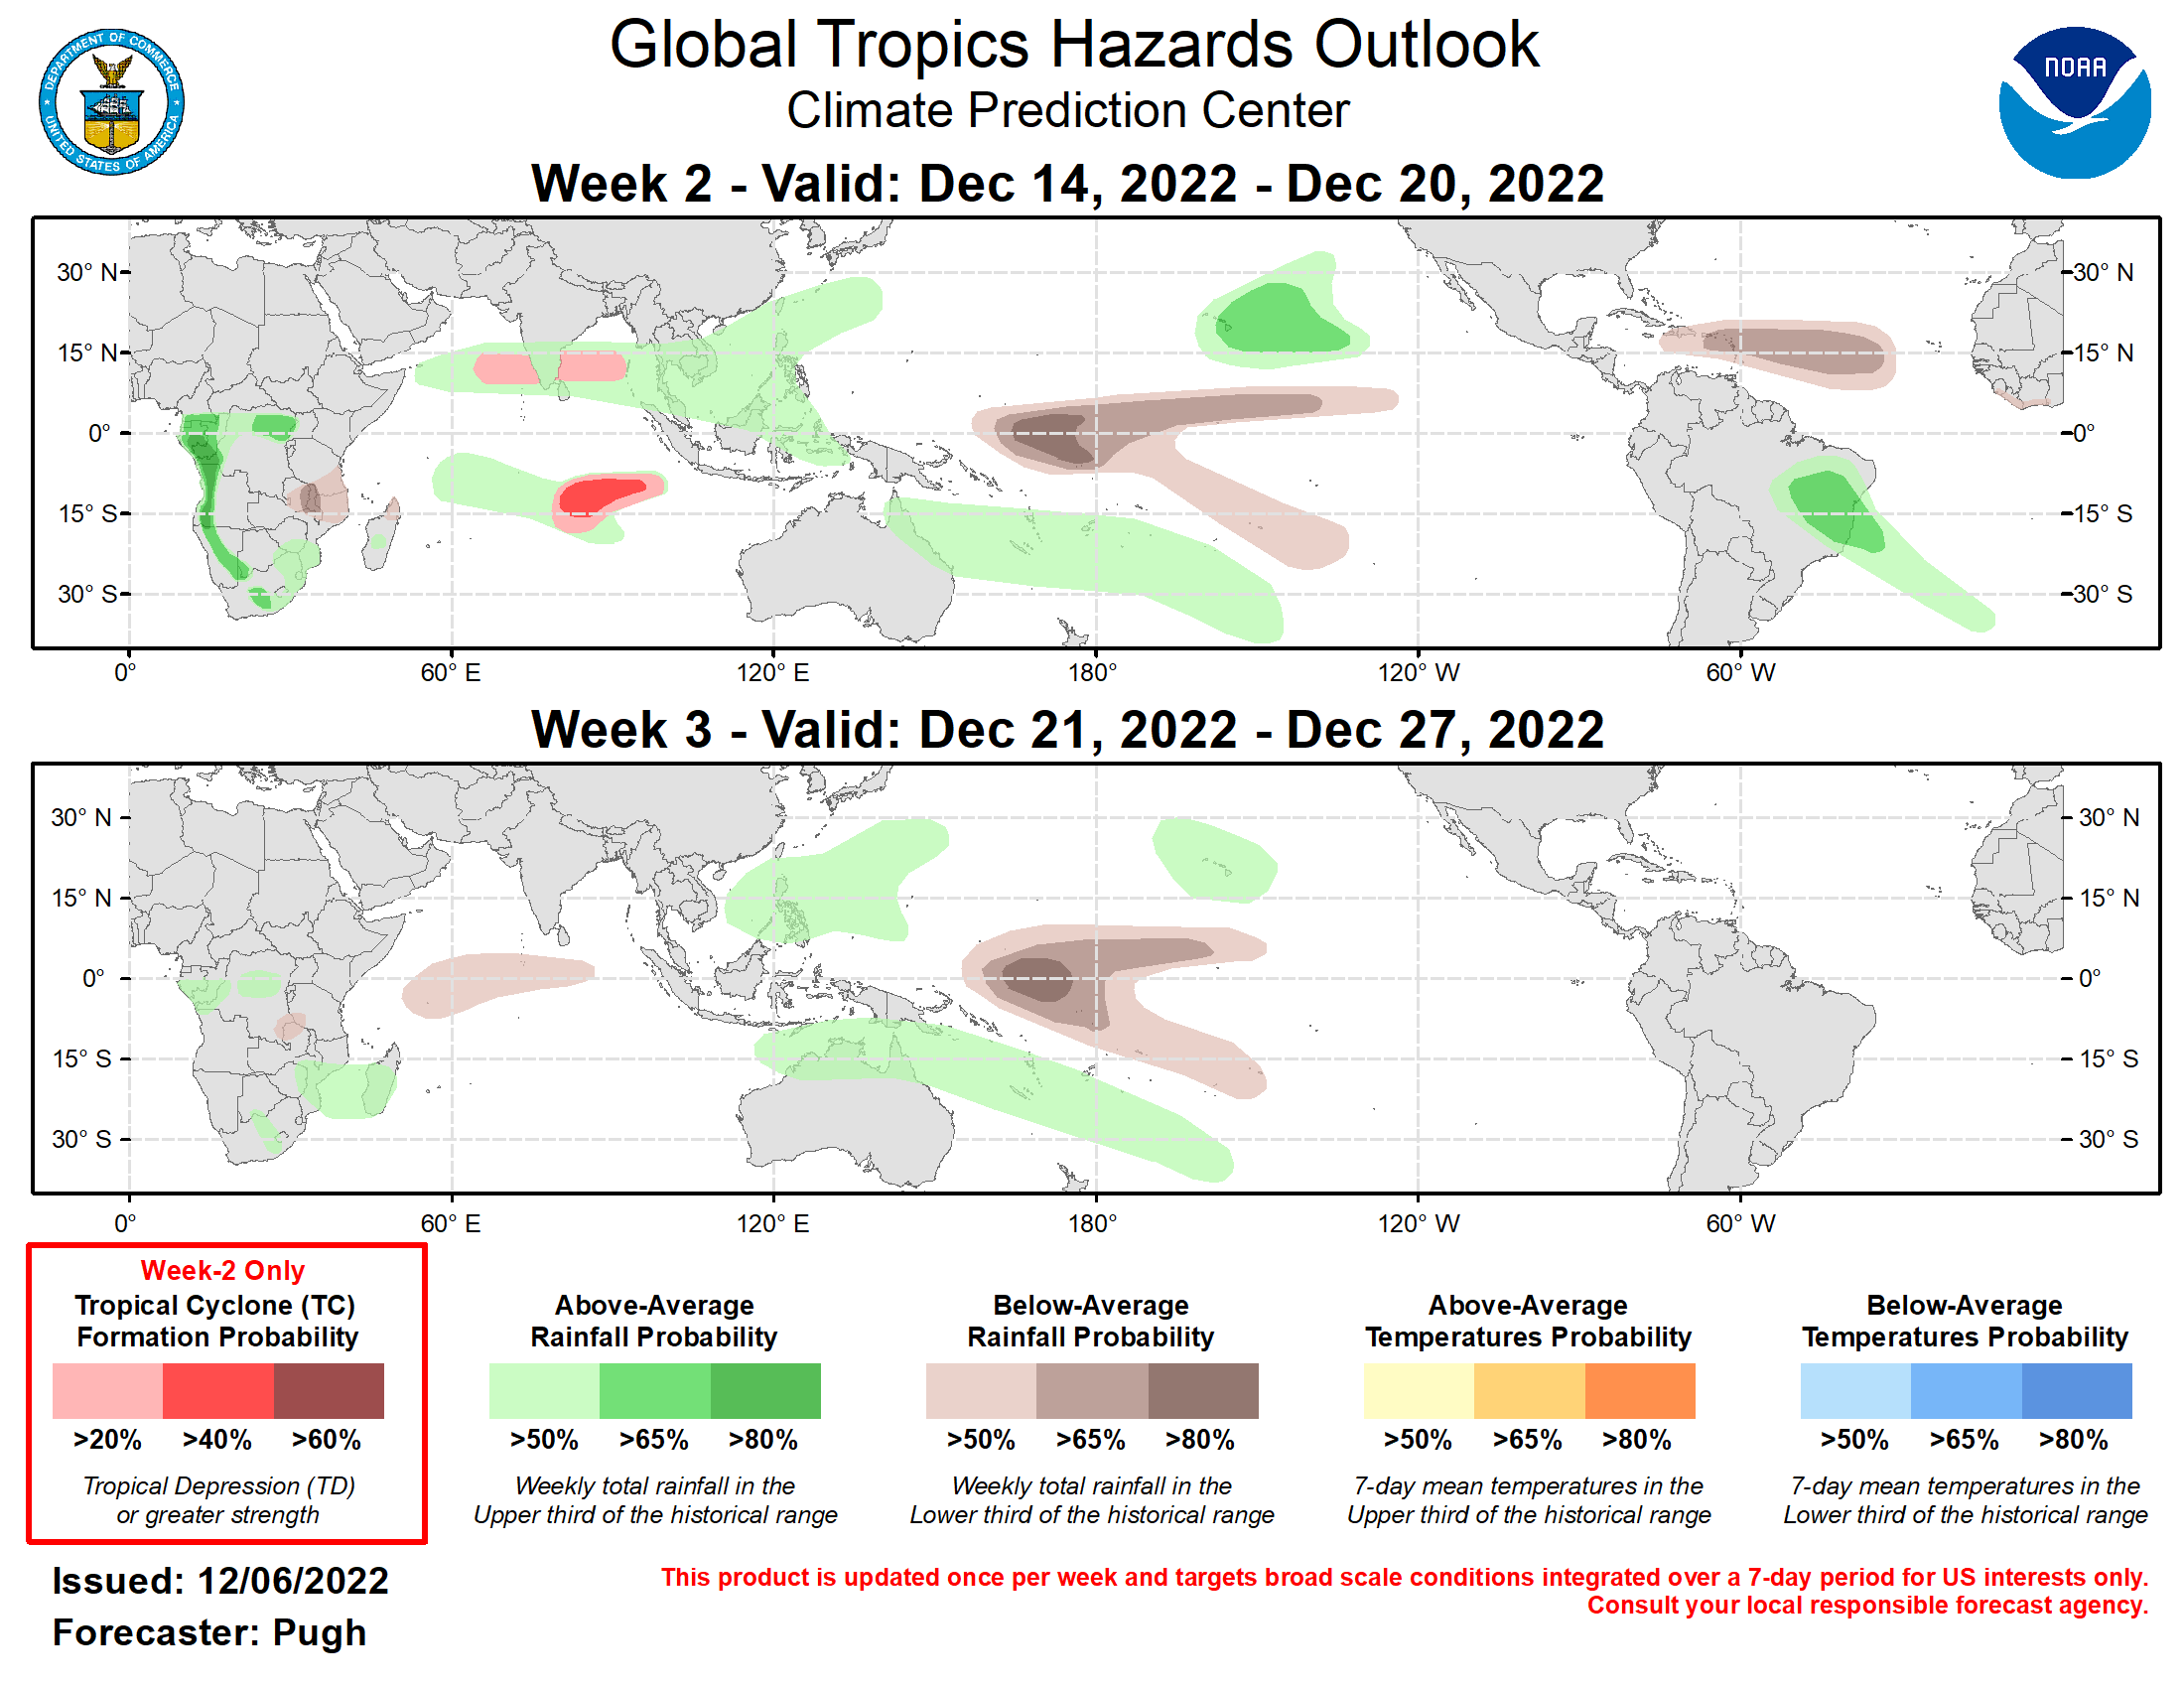 Last Updated - 12/06/22 Valid - 12/14/22 - 12/27/22 La Nina continues to be the major influence on anomalous rainfall across the global tropics, but a relatively strong MJO propagated eastward from the Pacific to the Western Hemisphere during late November. The MJO began to weaken at the beginning of December with the RMM index decreasing in amplitude and the 200-hPa velocity potential field becoming less coherent. Dynamical models diverge on the future MJO evolution with the CFS most bullish with a continued eastward propagation from the Indian to Pacific Ocean during the next three weeks. The GFS and ECMWF models depict an eastward propagation of anomalous upper-level divergence through mid-December, but those model solutions favor La Nina likely becoming the dominant factor in global tropical rainfall by week-3. It is noteworthy that there is a very large dispersion in the ensemble members, as early as week-2, of the predicted MJO phase in RMM space.  No tropical cyclones (TCs) formed over the West Pacific or Indian Ocean since mid-November, which is consistent with the suppressed phase of the MJO over the Eastern Hemisphere. As a remnant MJO signal shifts eastward over the Indian Ocean to the West Pacific during the next two weeks, a more favorable large-scale environment for TC development is expected across the Indian Ocean basin for at least week 2. Although a TC may form earlier, a 20 percent chance of TC genesis is posted for the Arabian Sea and Bay of Bengal during week-2. The highest forecast confidence for week-2 formation exists across the South Indian Ocean.  The precipitation outlook for weeks 2 and 3 is based on potential TC tracks, ongoing La Nina conditions, and the consensus of GEFS, CFS, and ECMWF ensemble mean solutions. The remnant MJO signal along with dynamical models increase probabilities of above-average rainfall for parts of the Indian Ocean through week-2 with this favored wetness shifting east to the West Pacific and northern Australia by week-3. For week-2, the dynamical model consensus supports above-average rainfall for southern Brazil while a dry signal is forecast for the eastern Caribbean region. During weeks 2 and 3, La Nina supports increased probabilities of below (above)-average rainfall across the equatorial central Pacific (Hawaii).